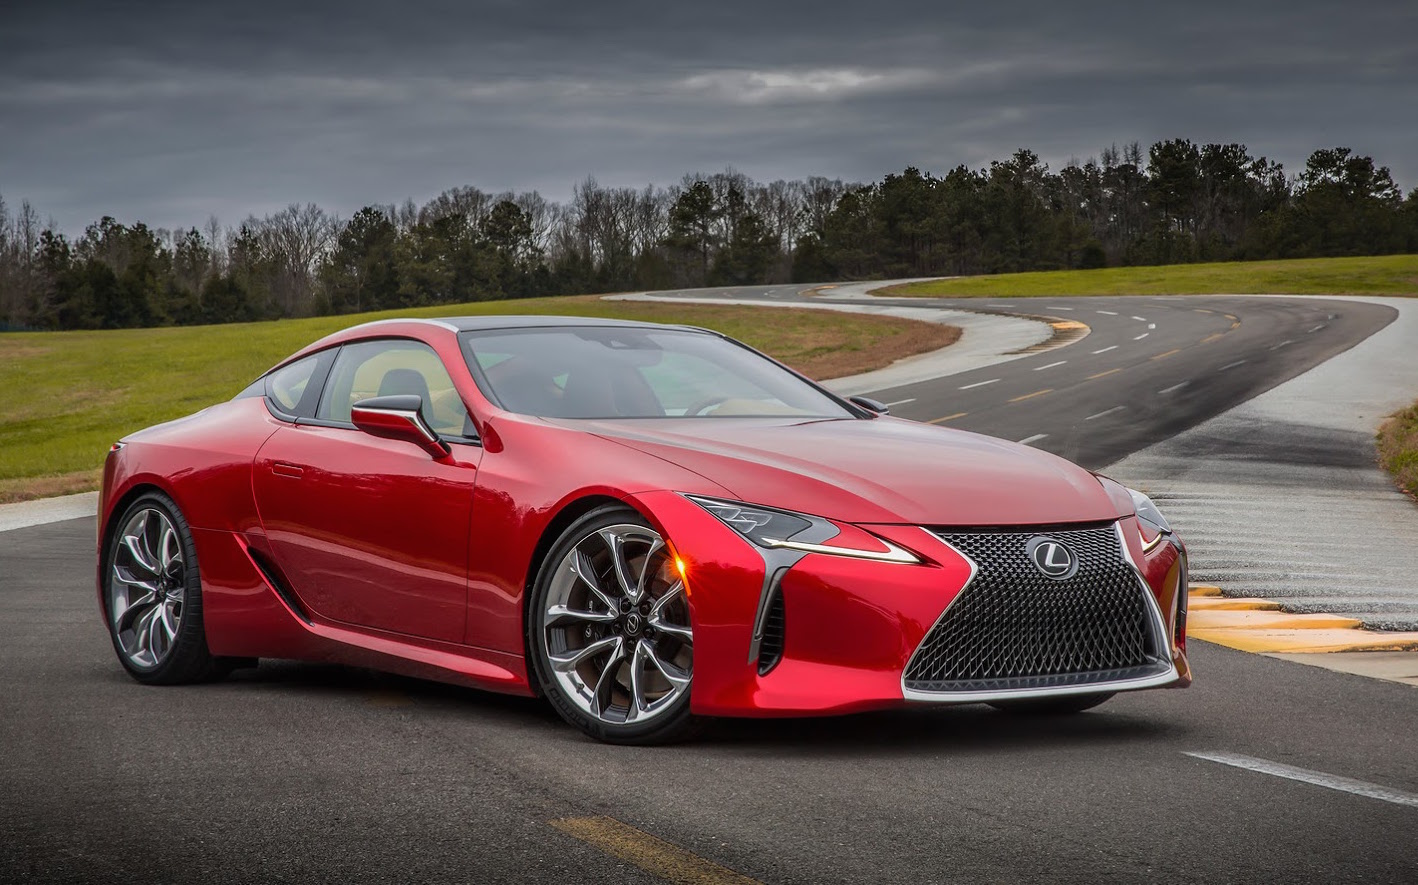 The Lexus LC 500: A Masterpiece of Automotive Excellence